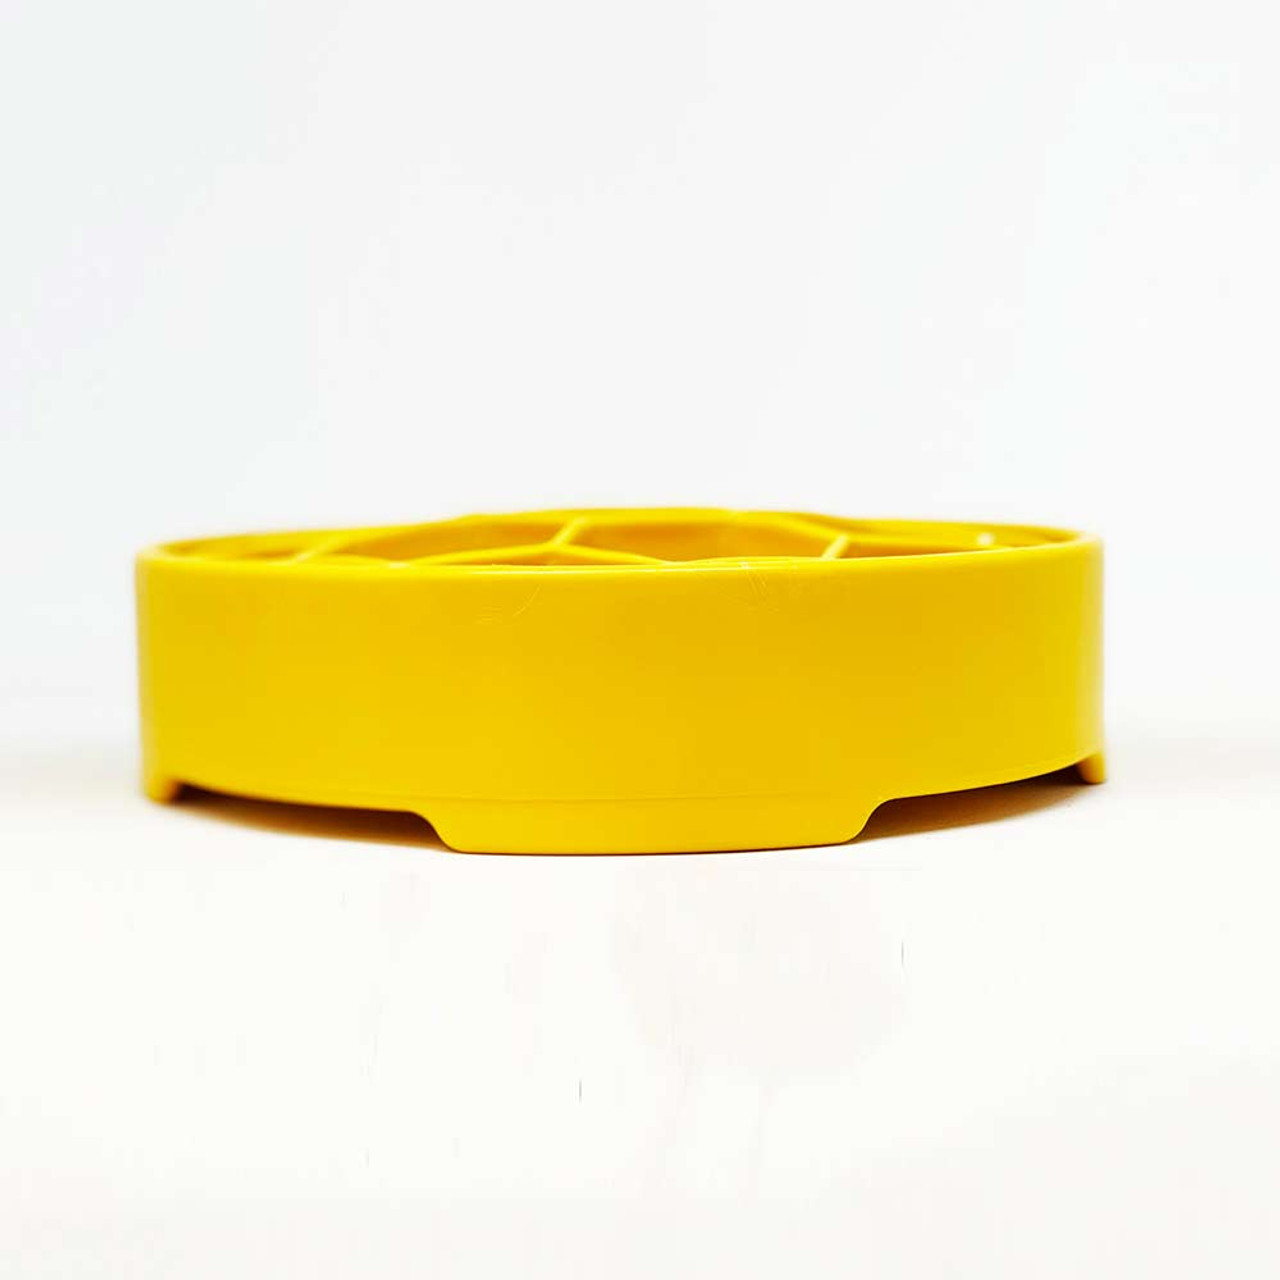 https://cdn11.bigcommerce.com/s-qfetj9wx4u/images/stencil/1280x1280/products/358/1211/Poko-and-Oki-SodaPup-Enrichment-Honeycomb-Slow-Feeder-Bowl-for-dogs-Yellow-03__55359.1683931704.jpg?c=1